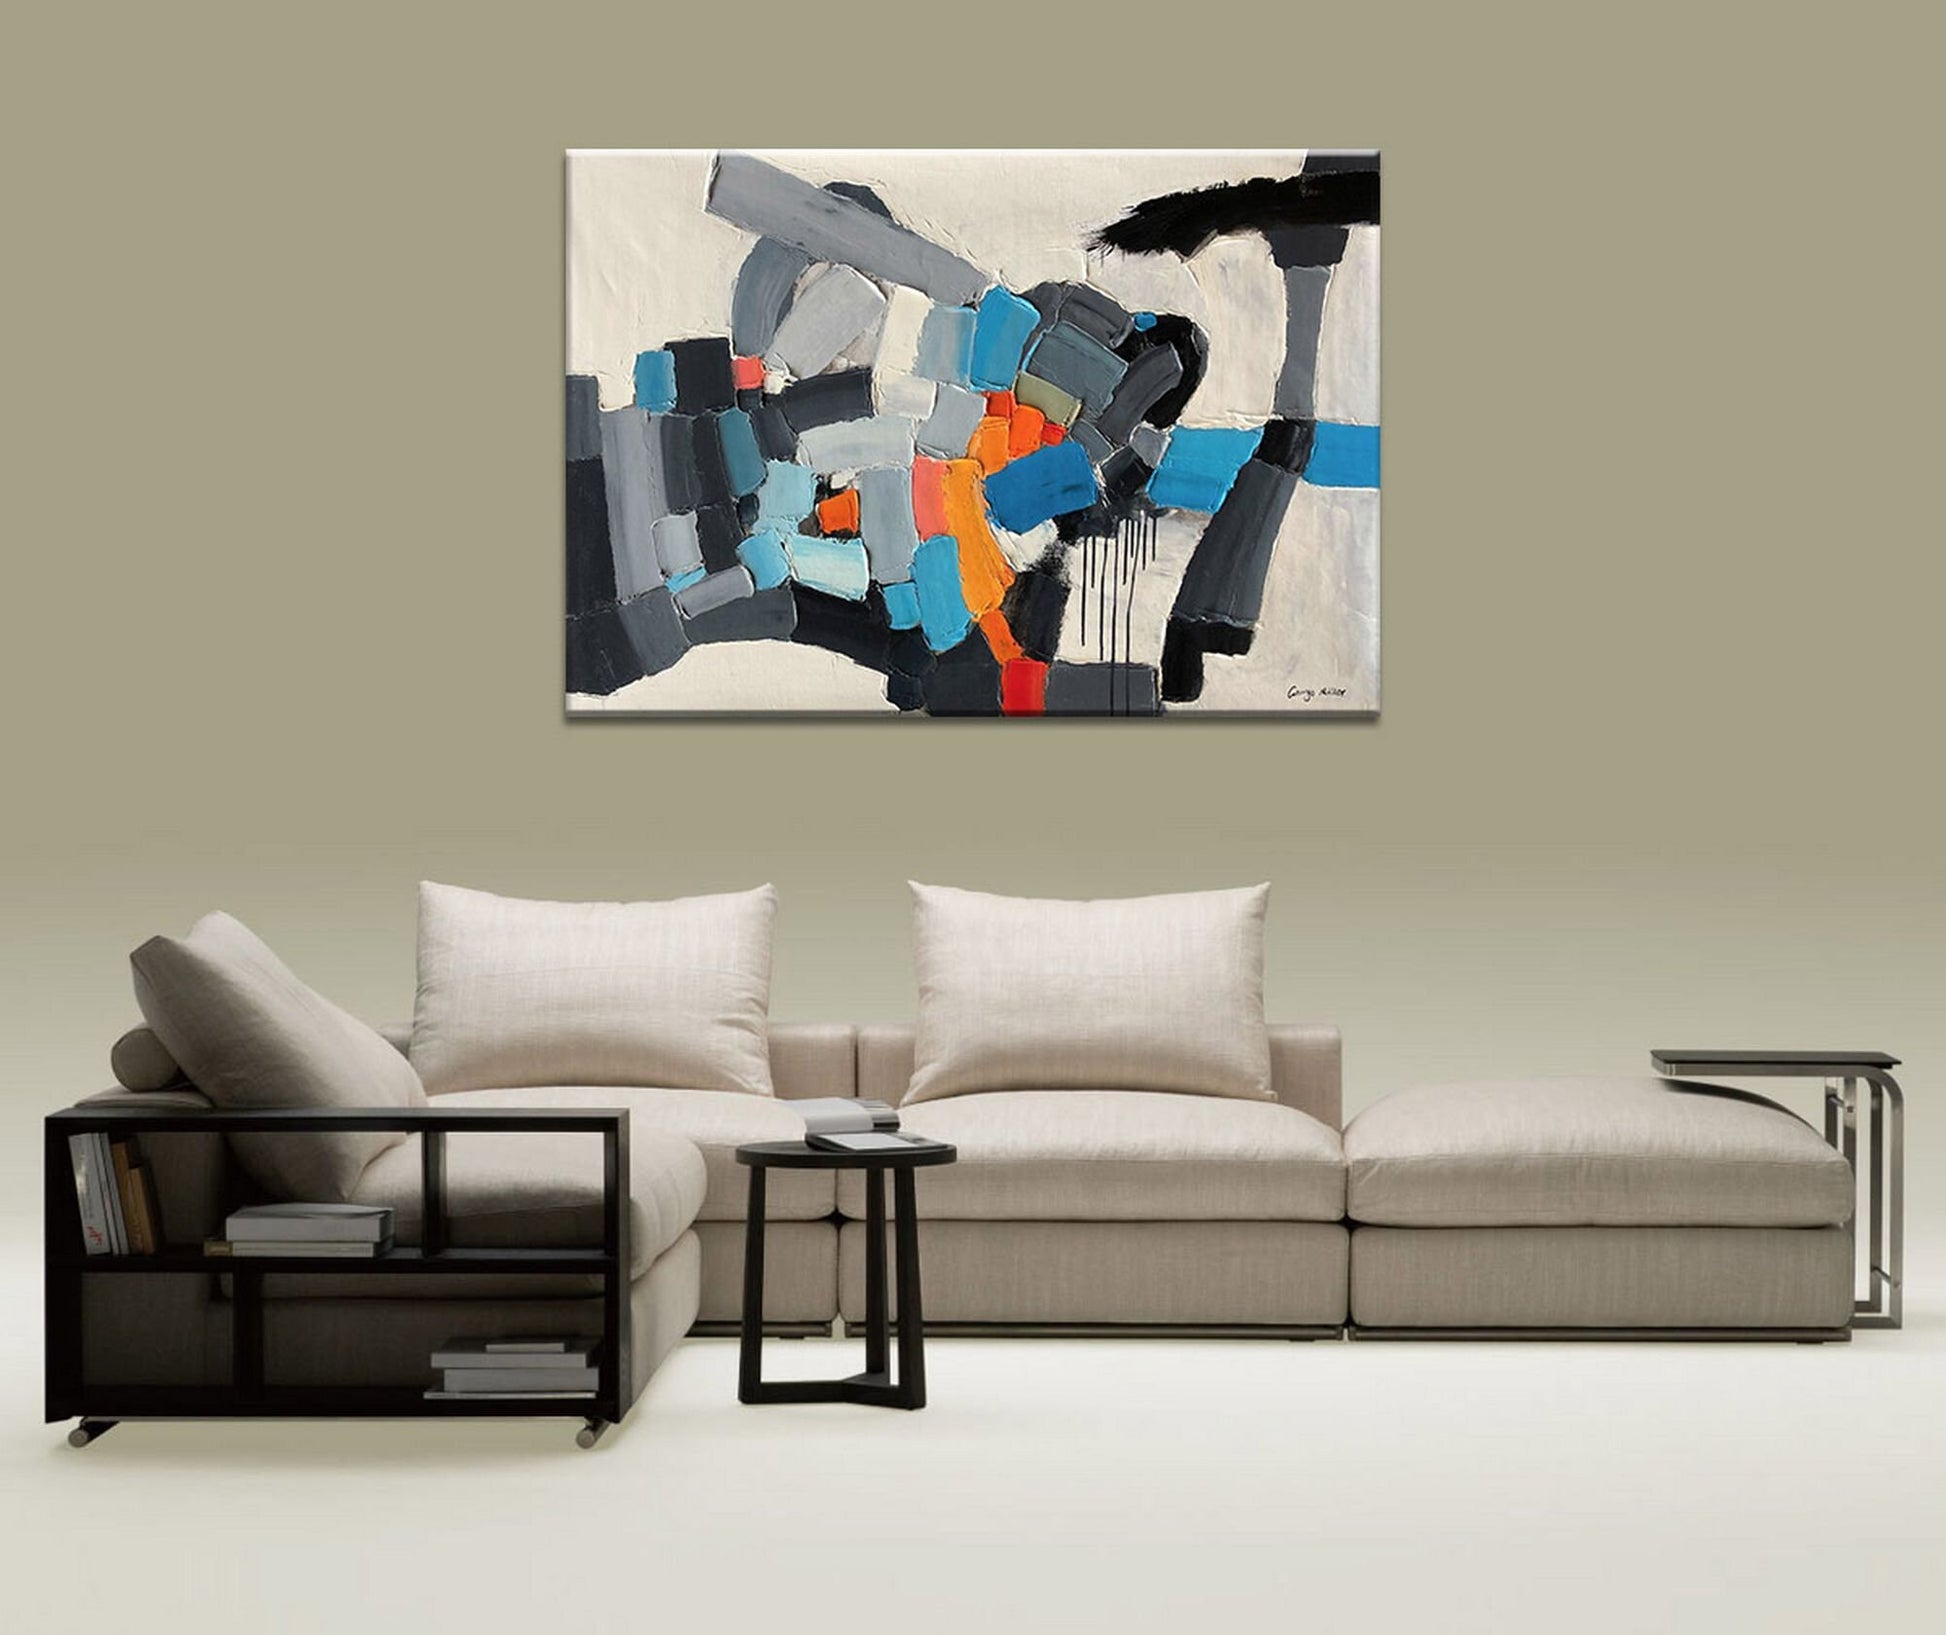 Abstract Art, Large Abstract Painting, Contemporary Art, Canvas Wall Decor, Canvas Art, Original Abstract Painting, Black and White Art